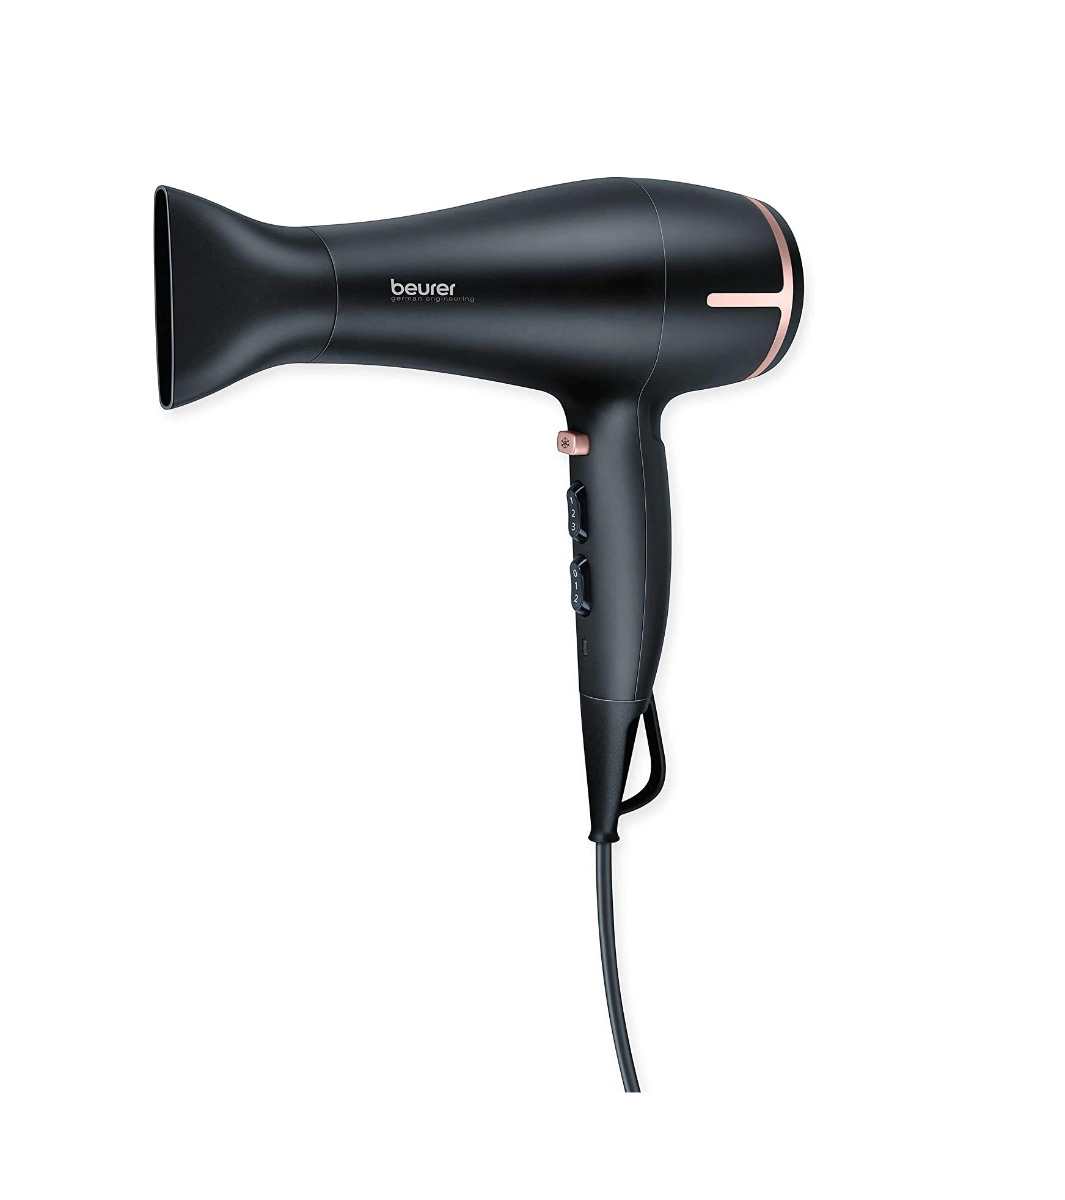 Beurer Hair Dryer, ECO technology 1400W consumption with 2000W output - HC 60